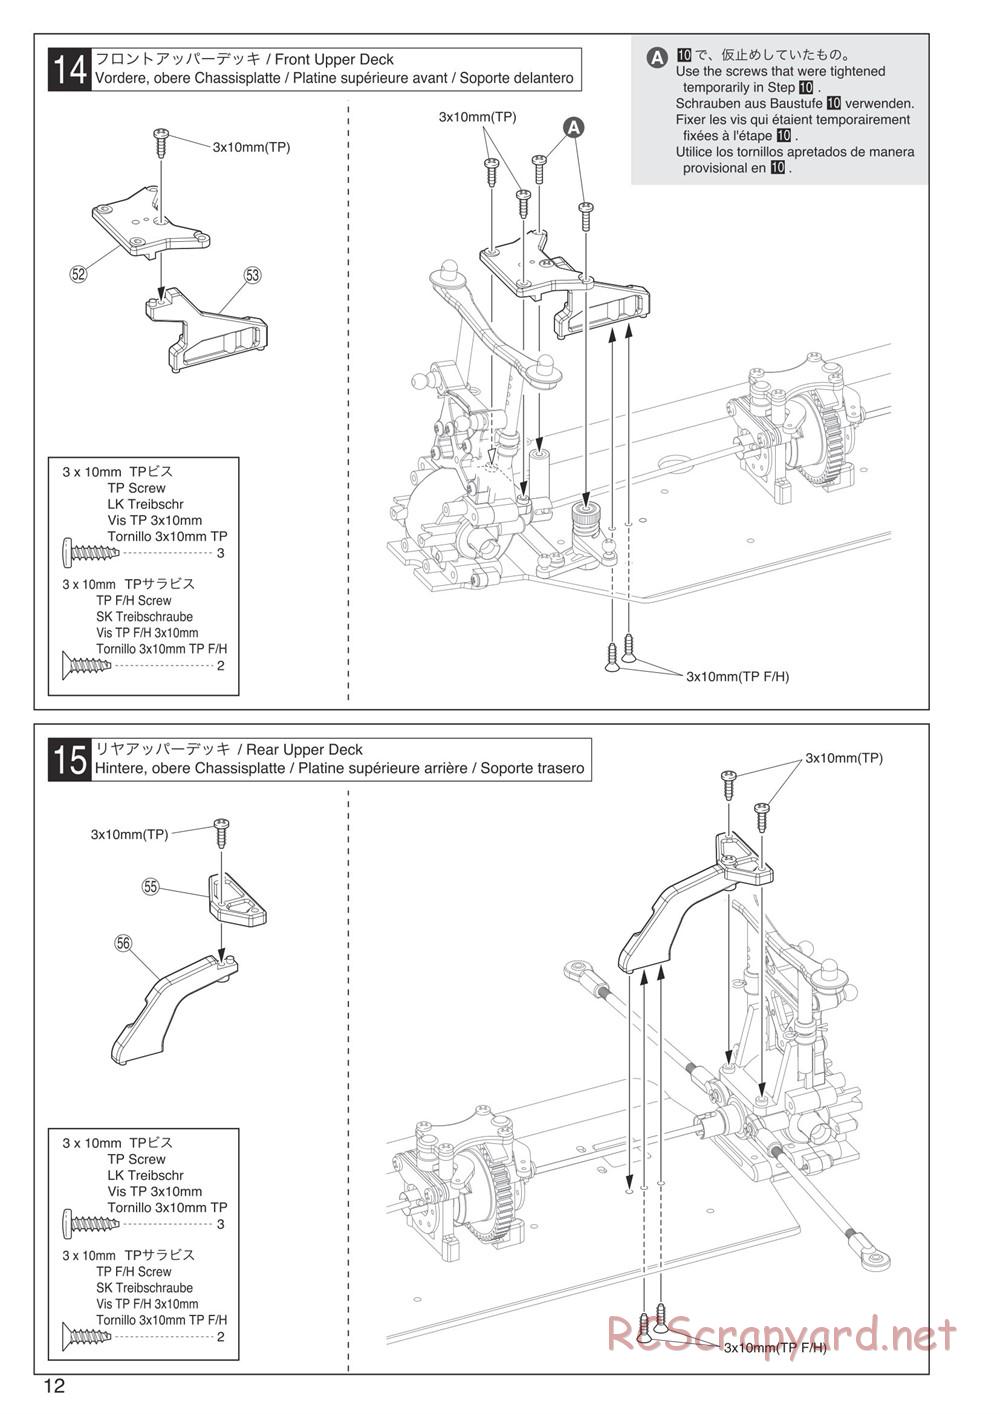 Kyosho - DMT - Manual - Page 12